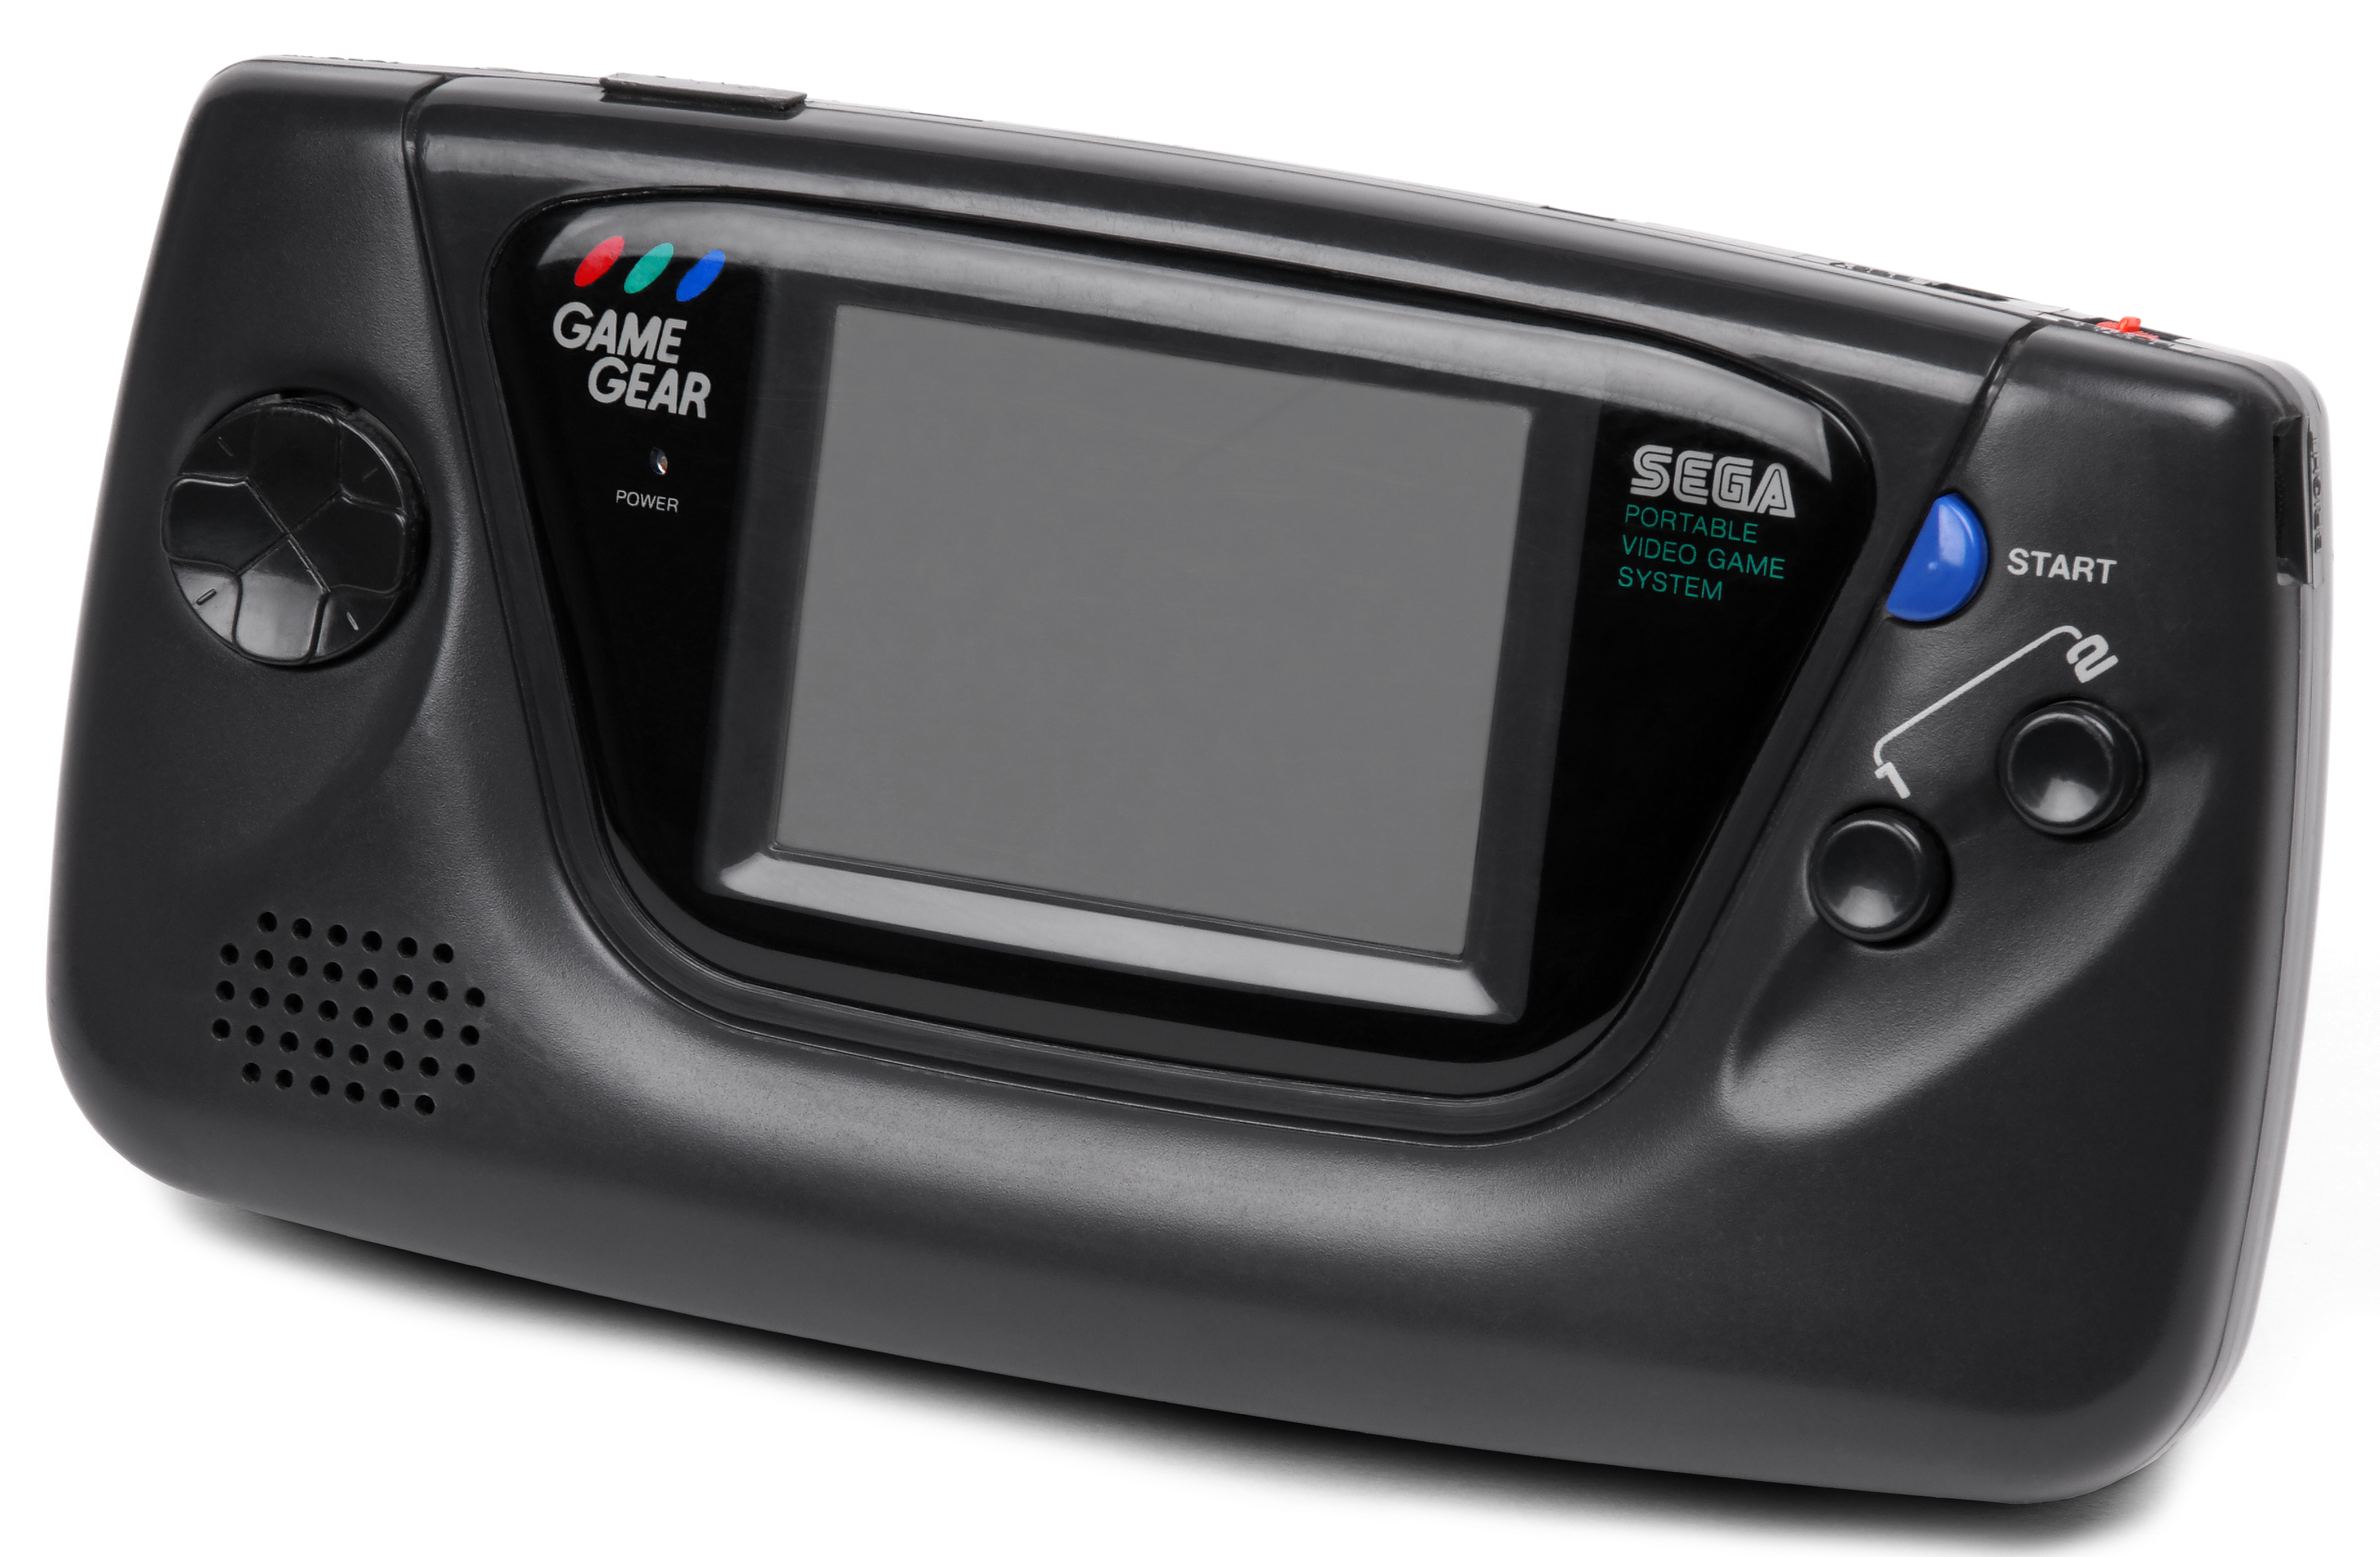 image of the Game Gear